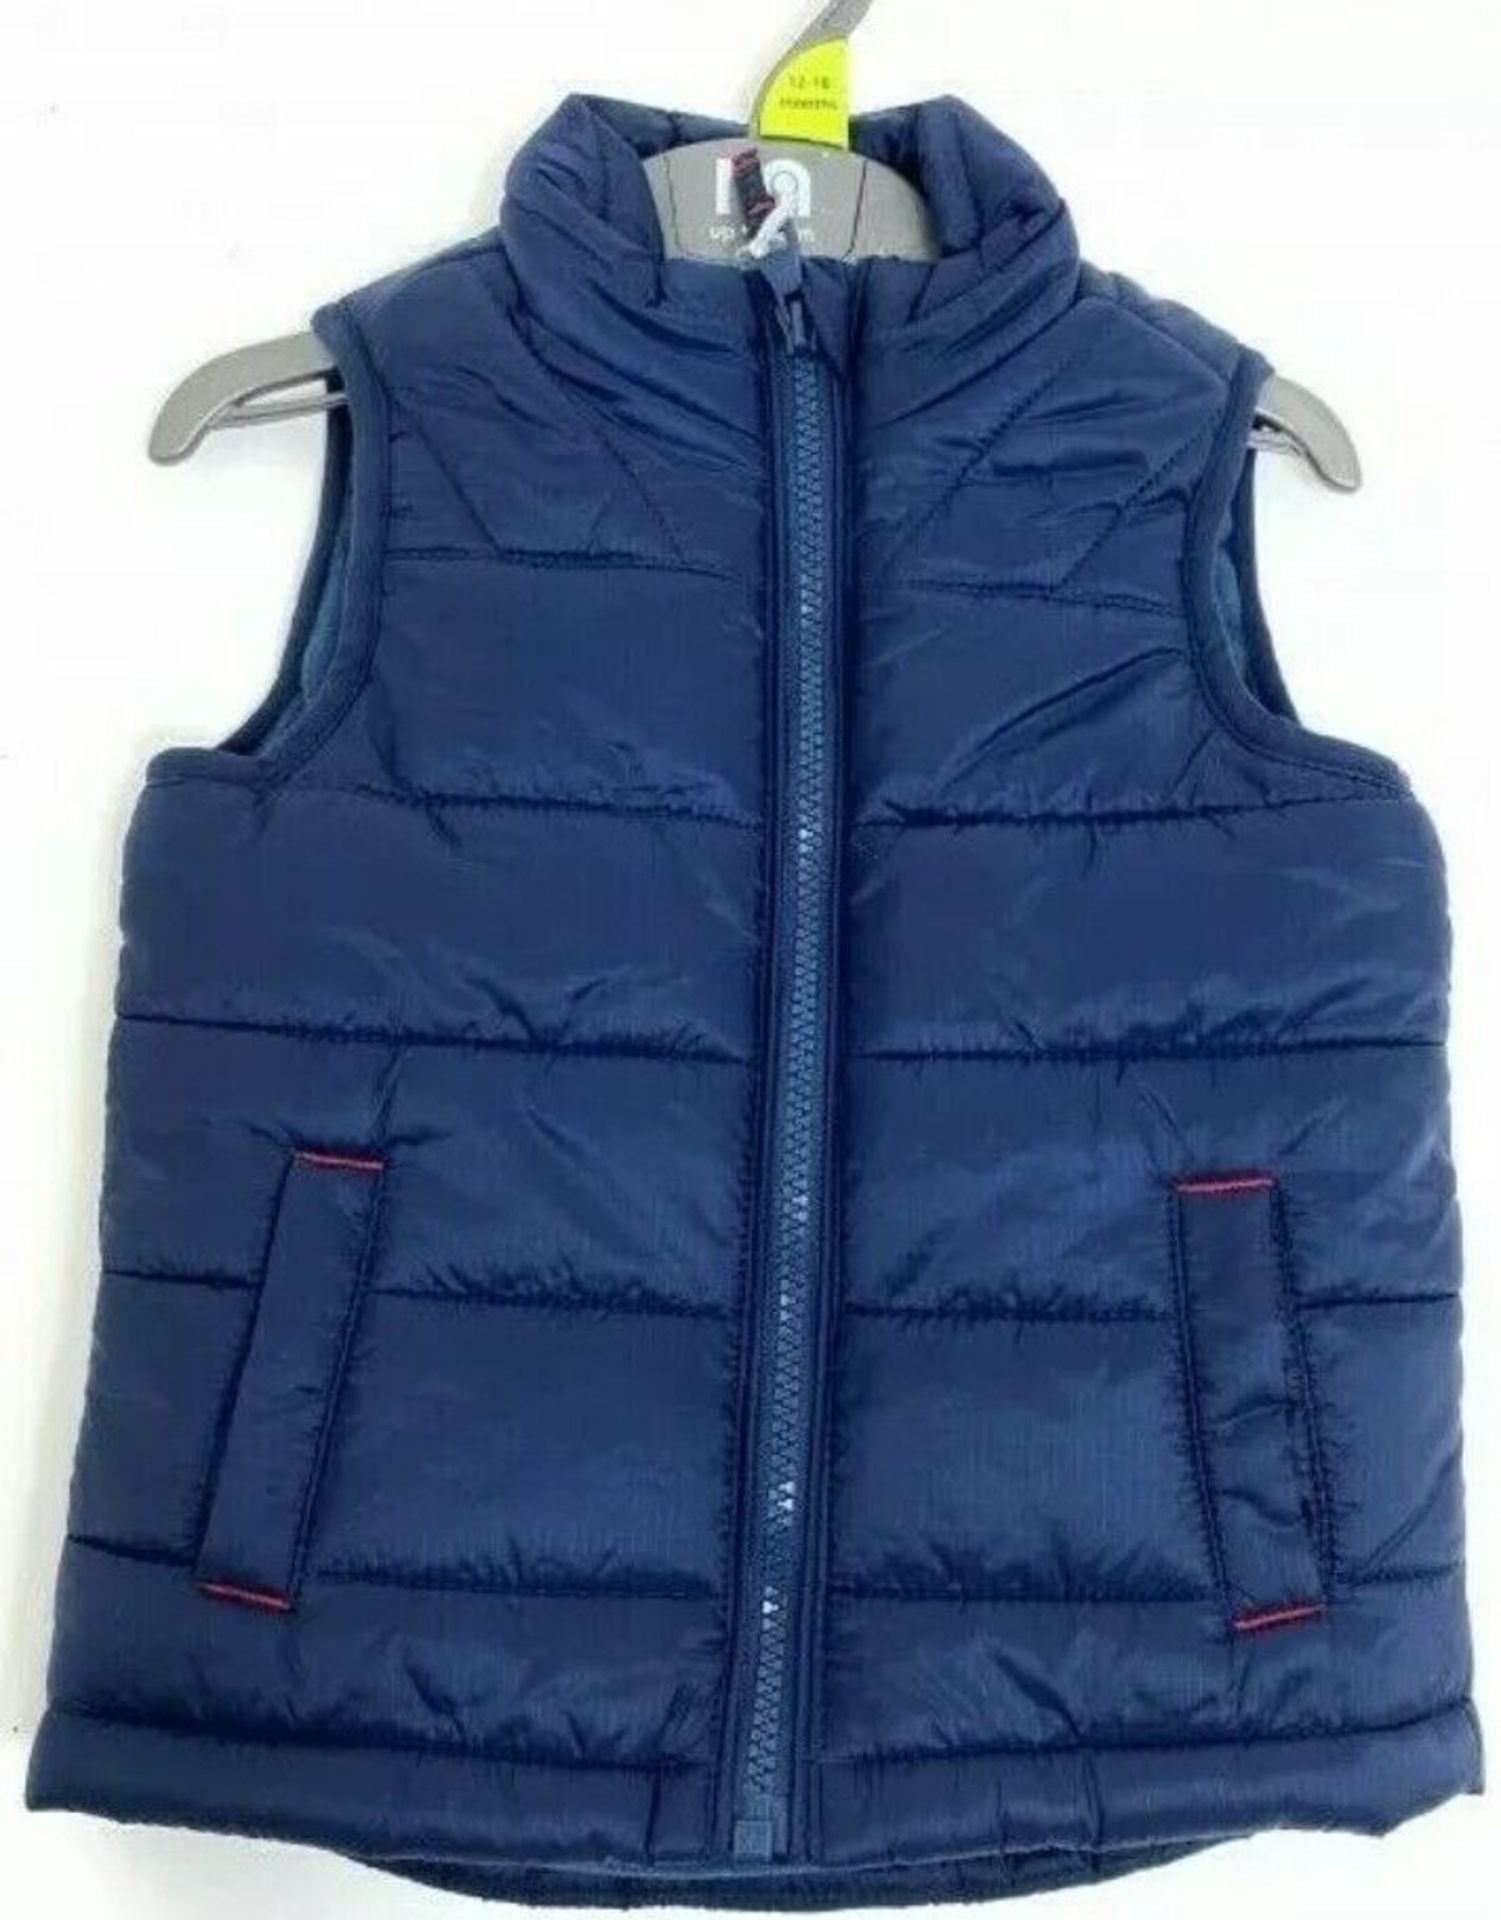 RRP 32.00 each 4 X Mothercare Blue Body Warmers Age 18-24m RRP 32.00 each